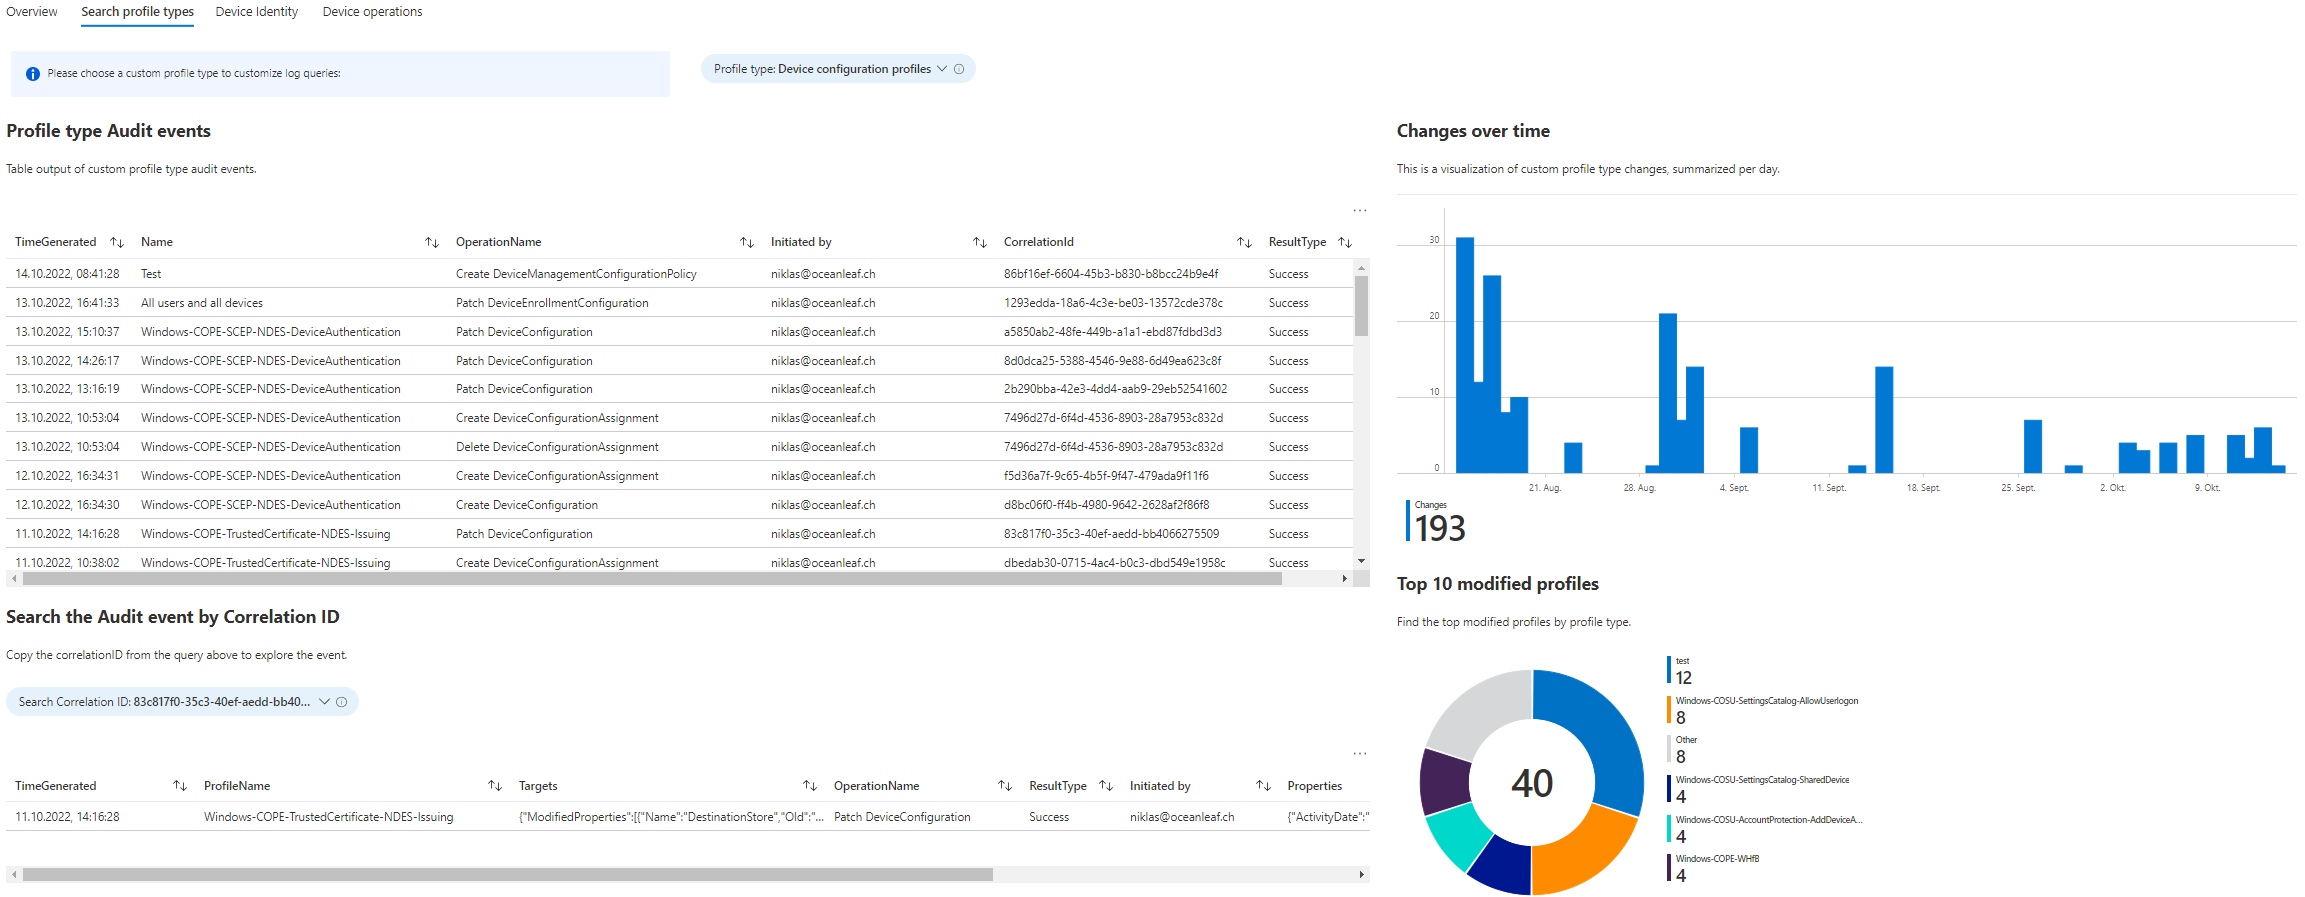 intune-change-tracking-search-profile-types-1-1.png